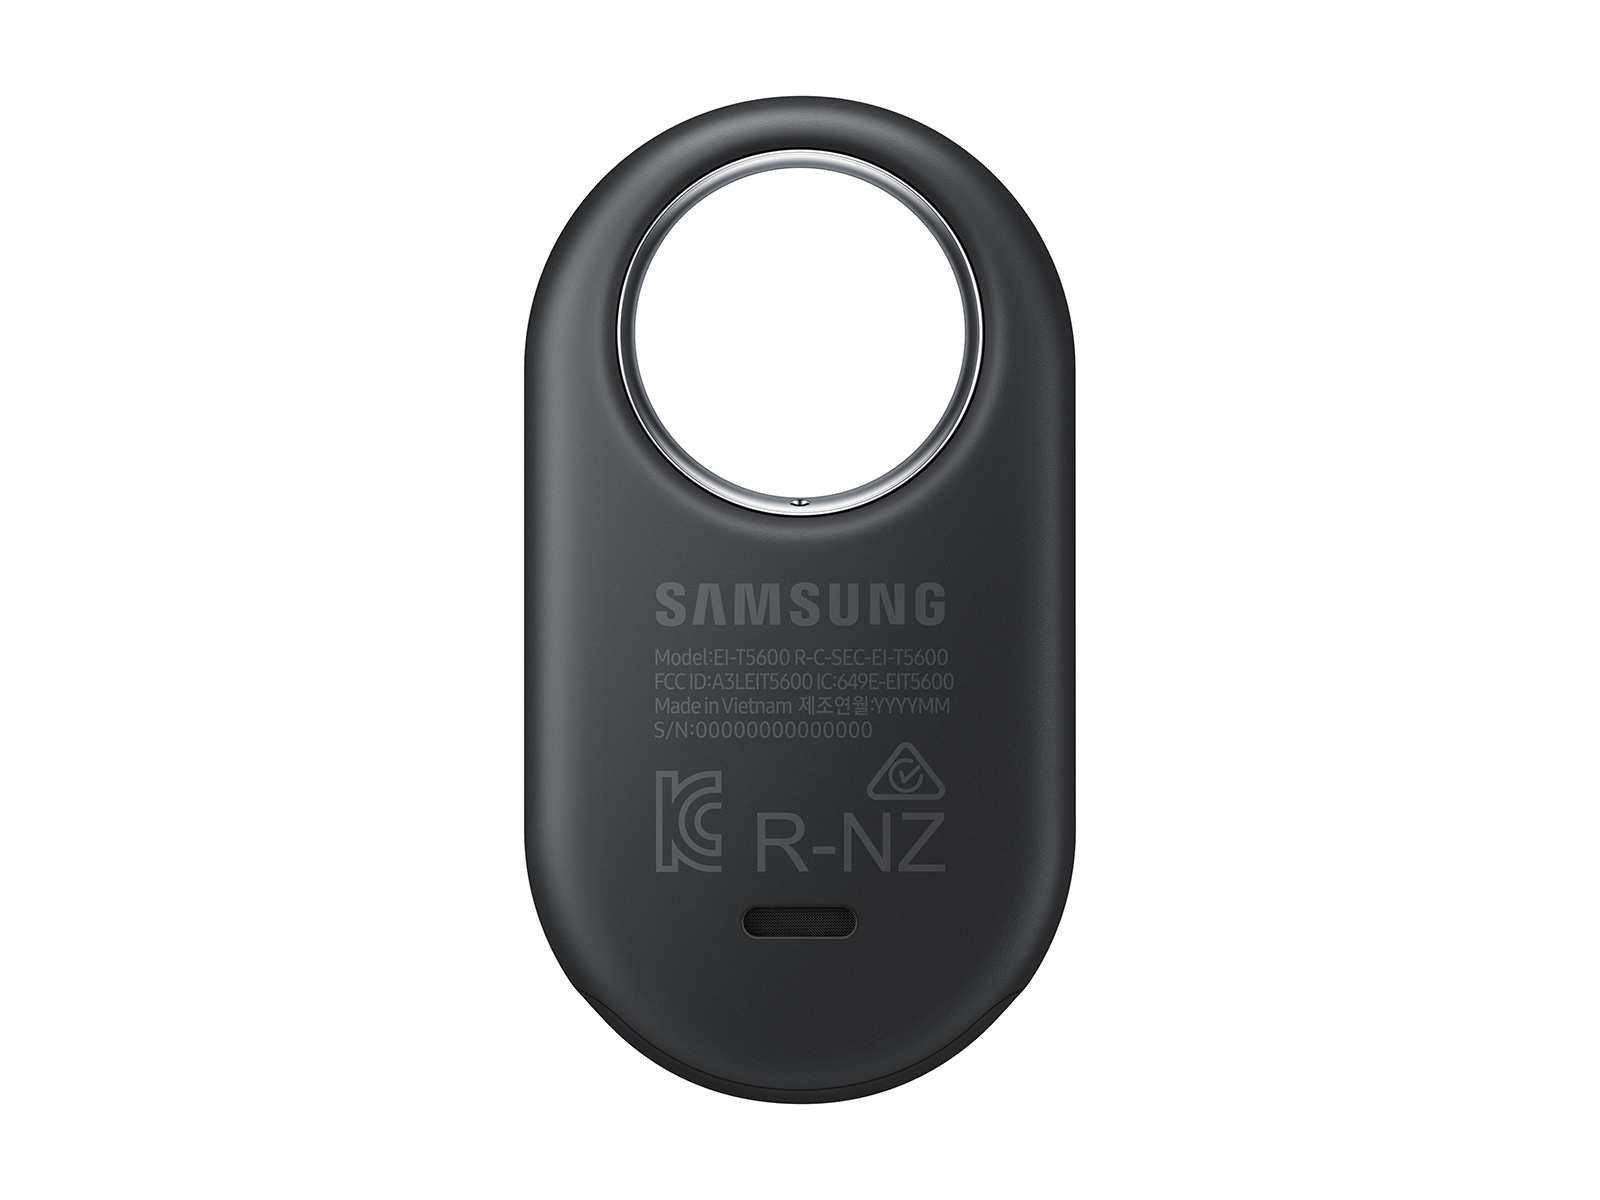 Samsung Galaxy SmartTag review: Locate anything! - Android Authority